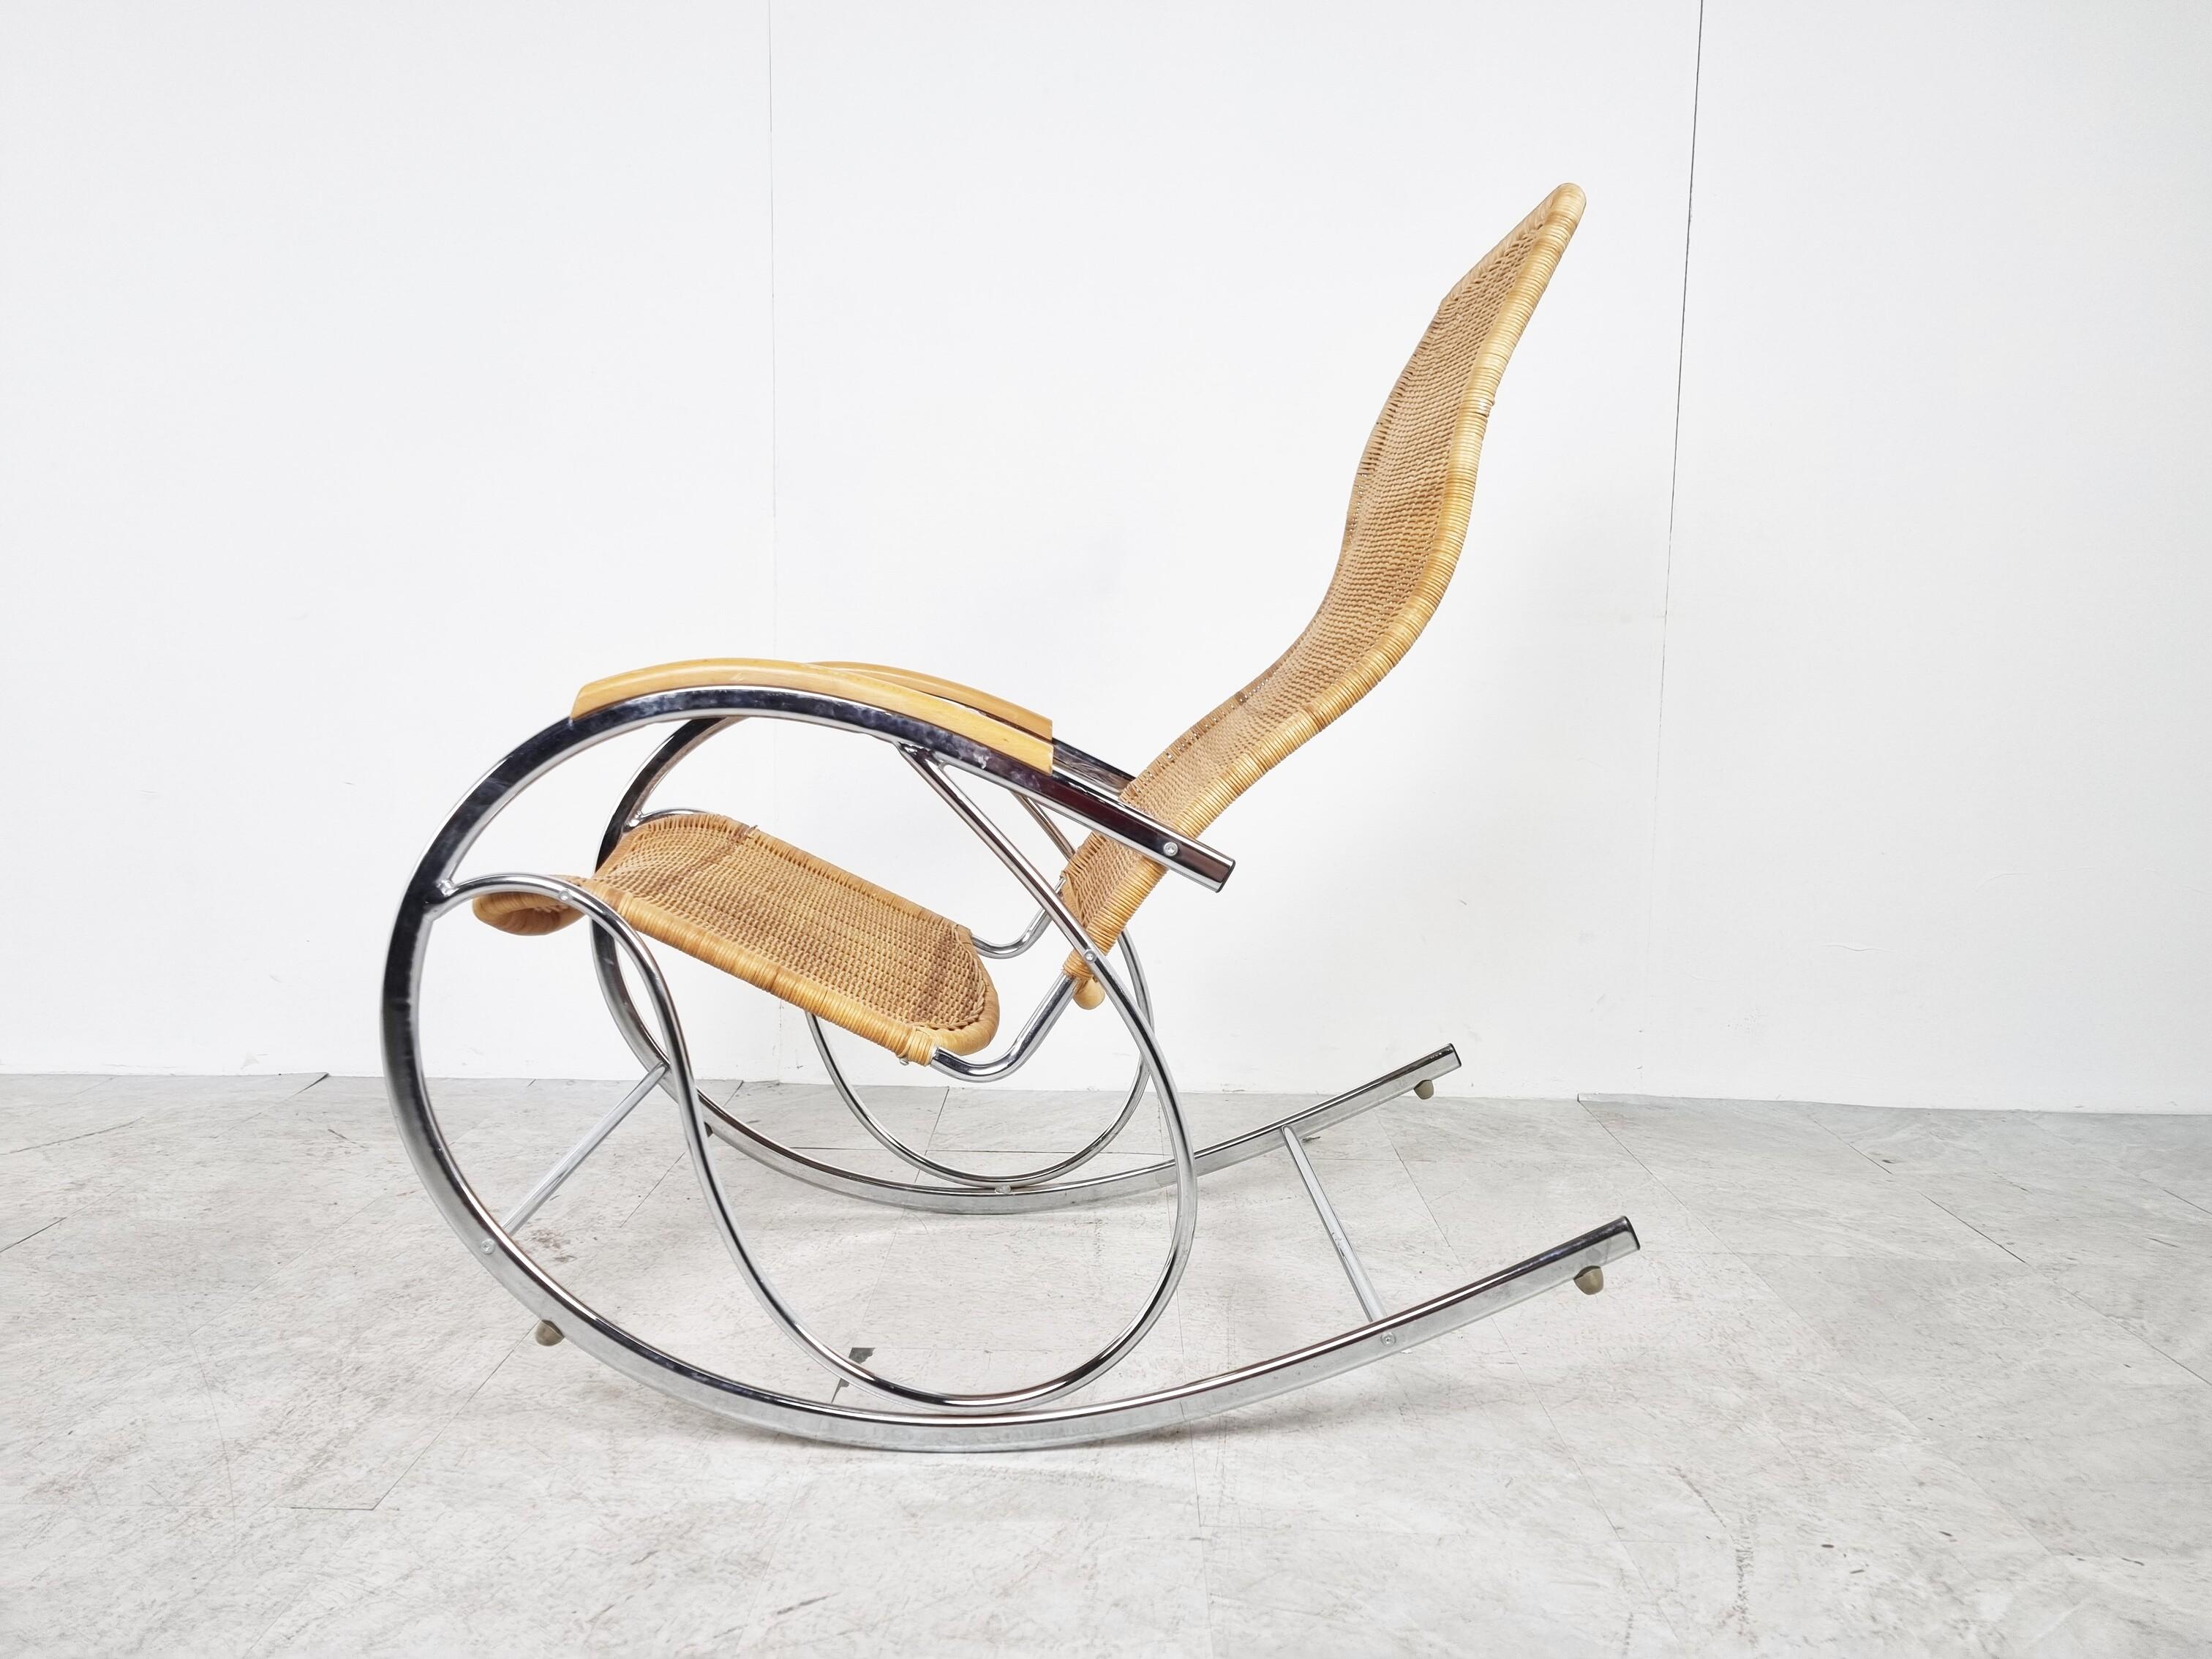 Bauhaus Vintage Chrome and Wicker Rocking Chair, 1970s For Sale